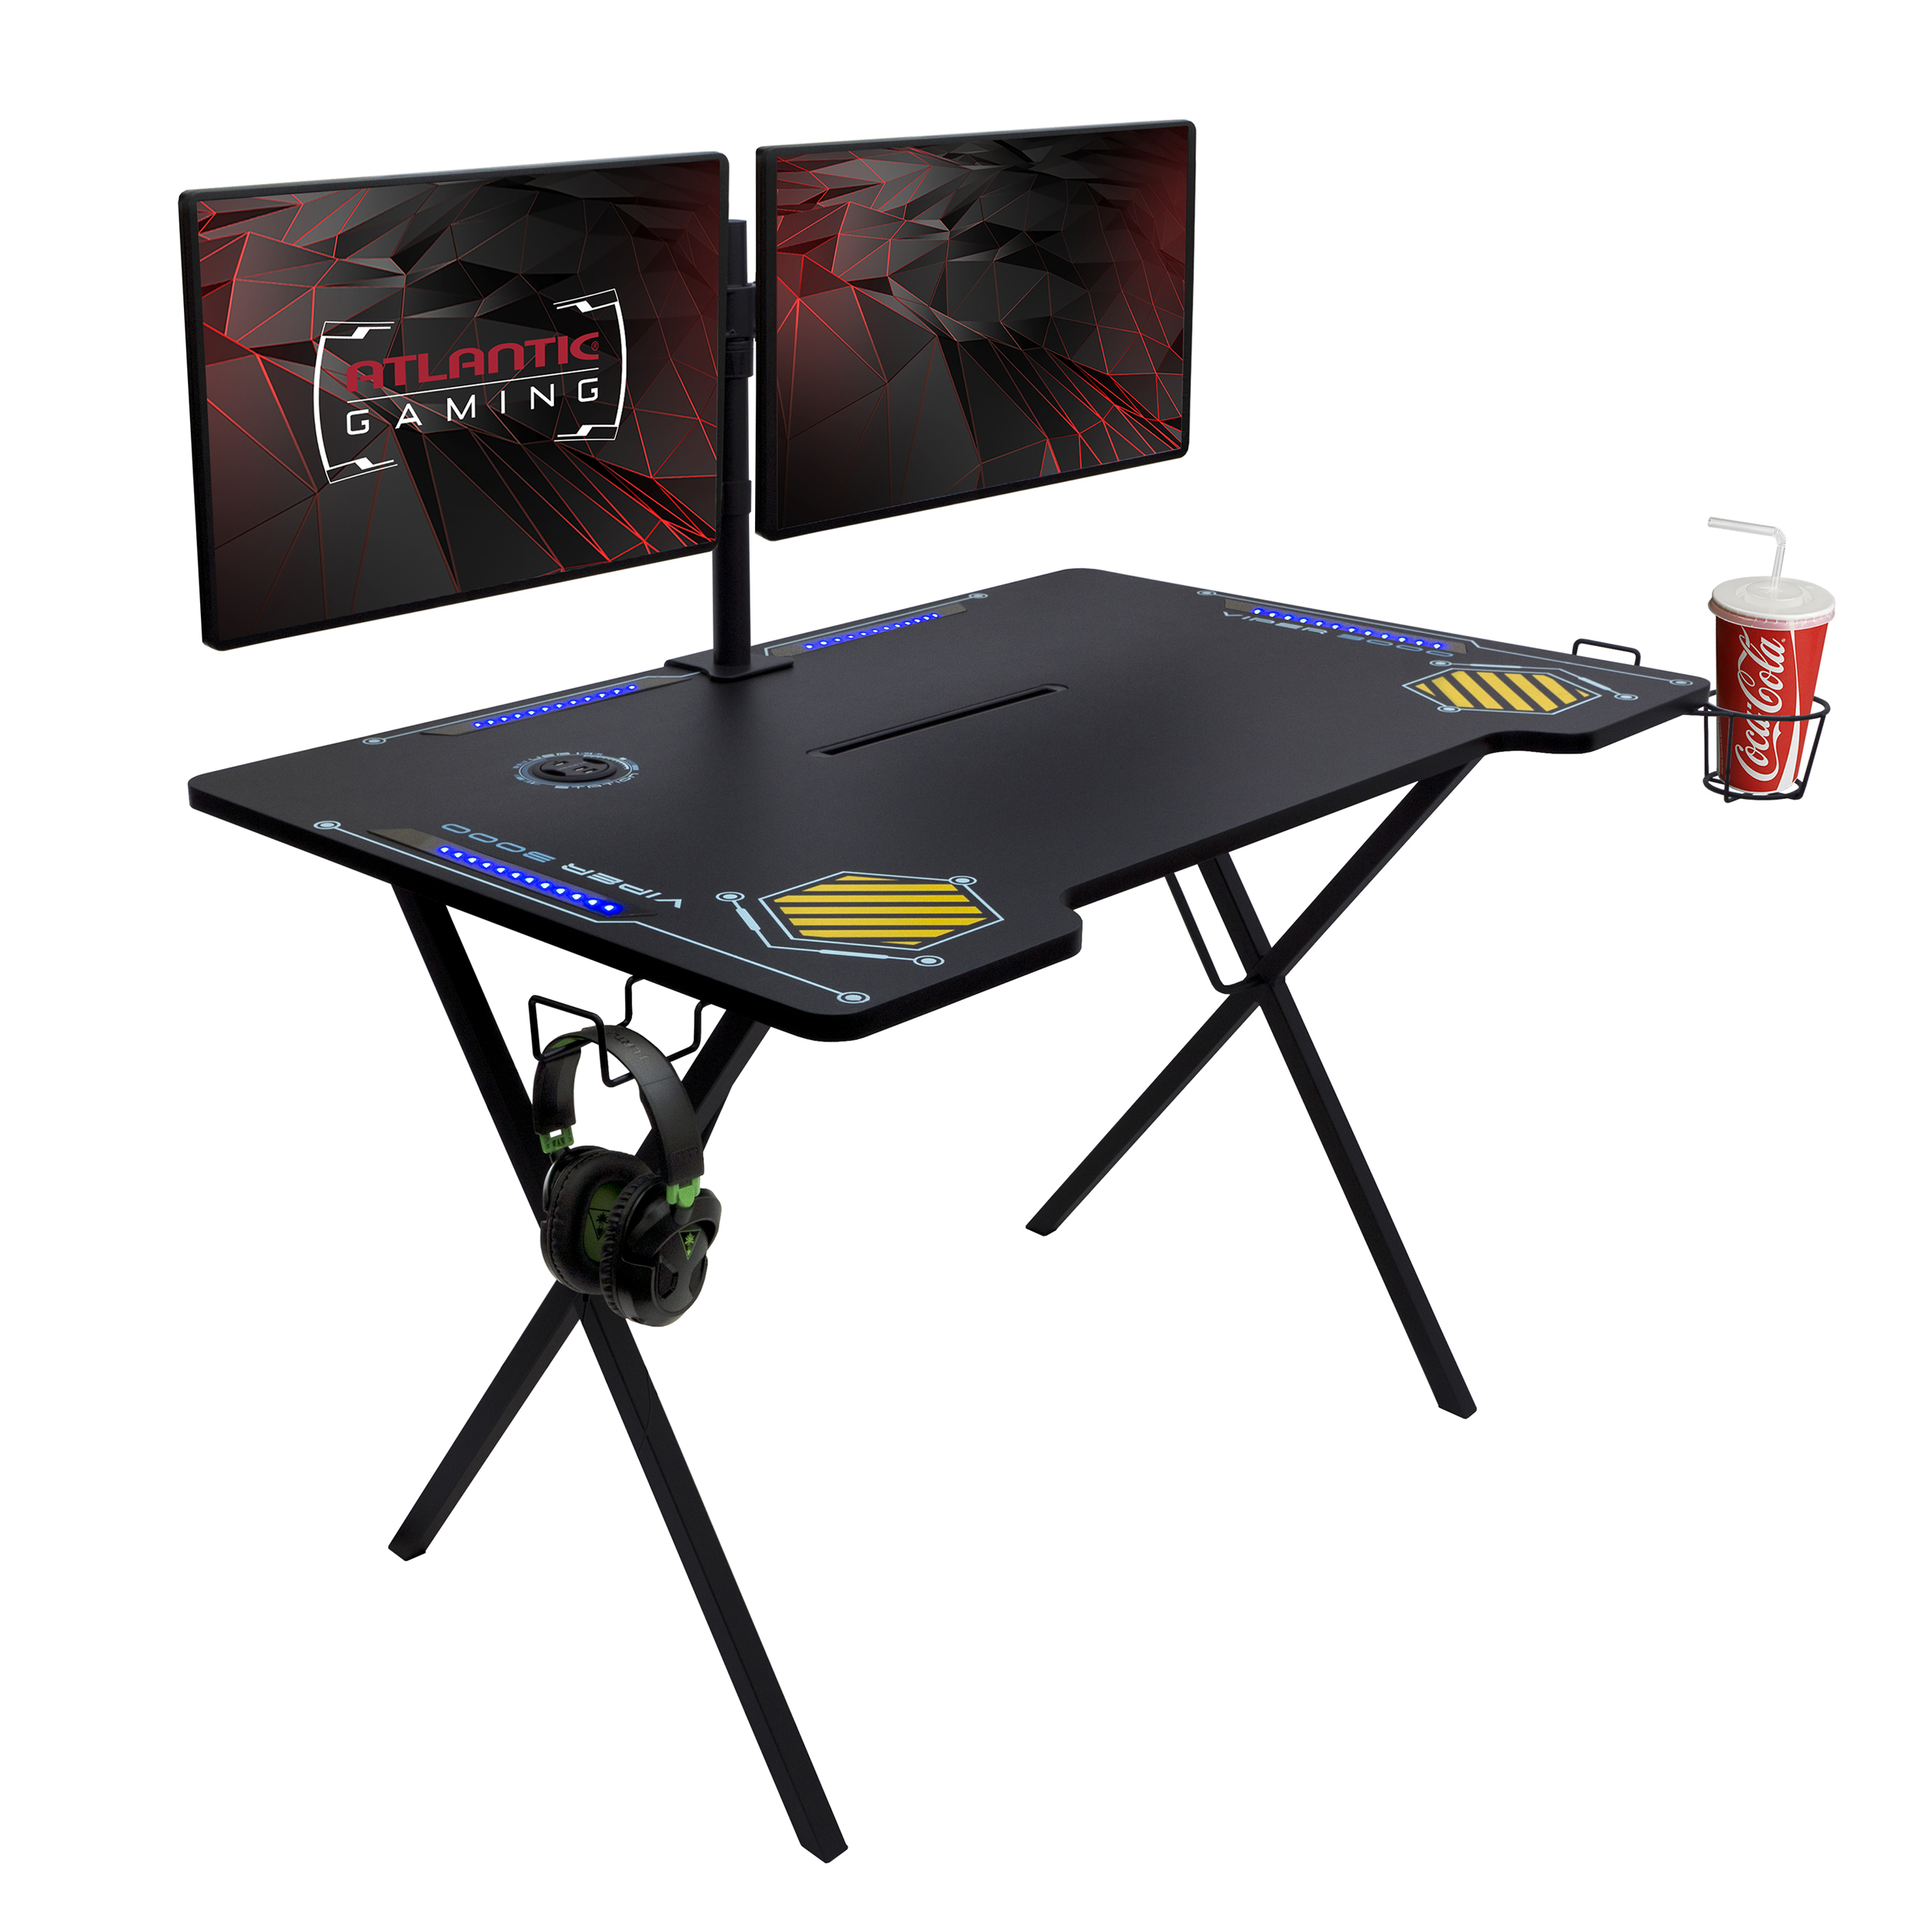 Atlantic Viper 3000 Gaming Desk with LED Lights, 52.5"W x 32.5" D x 29.6"H, Black - image 1 of 8